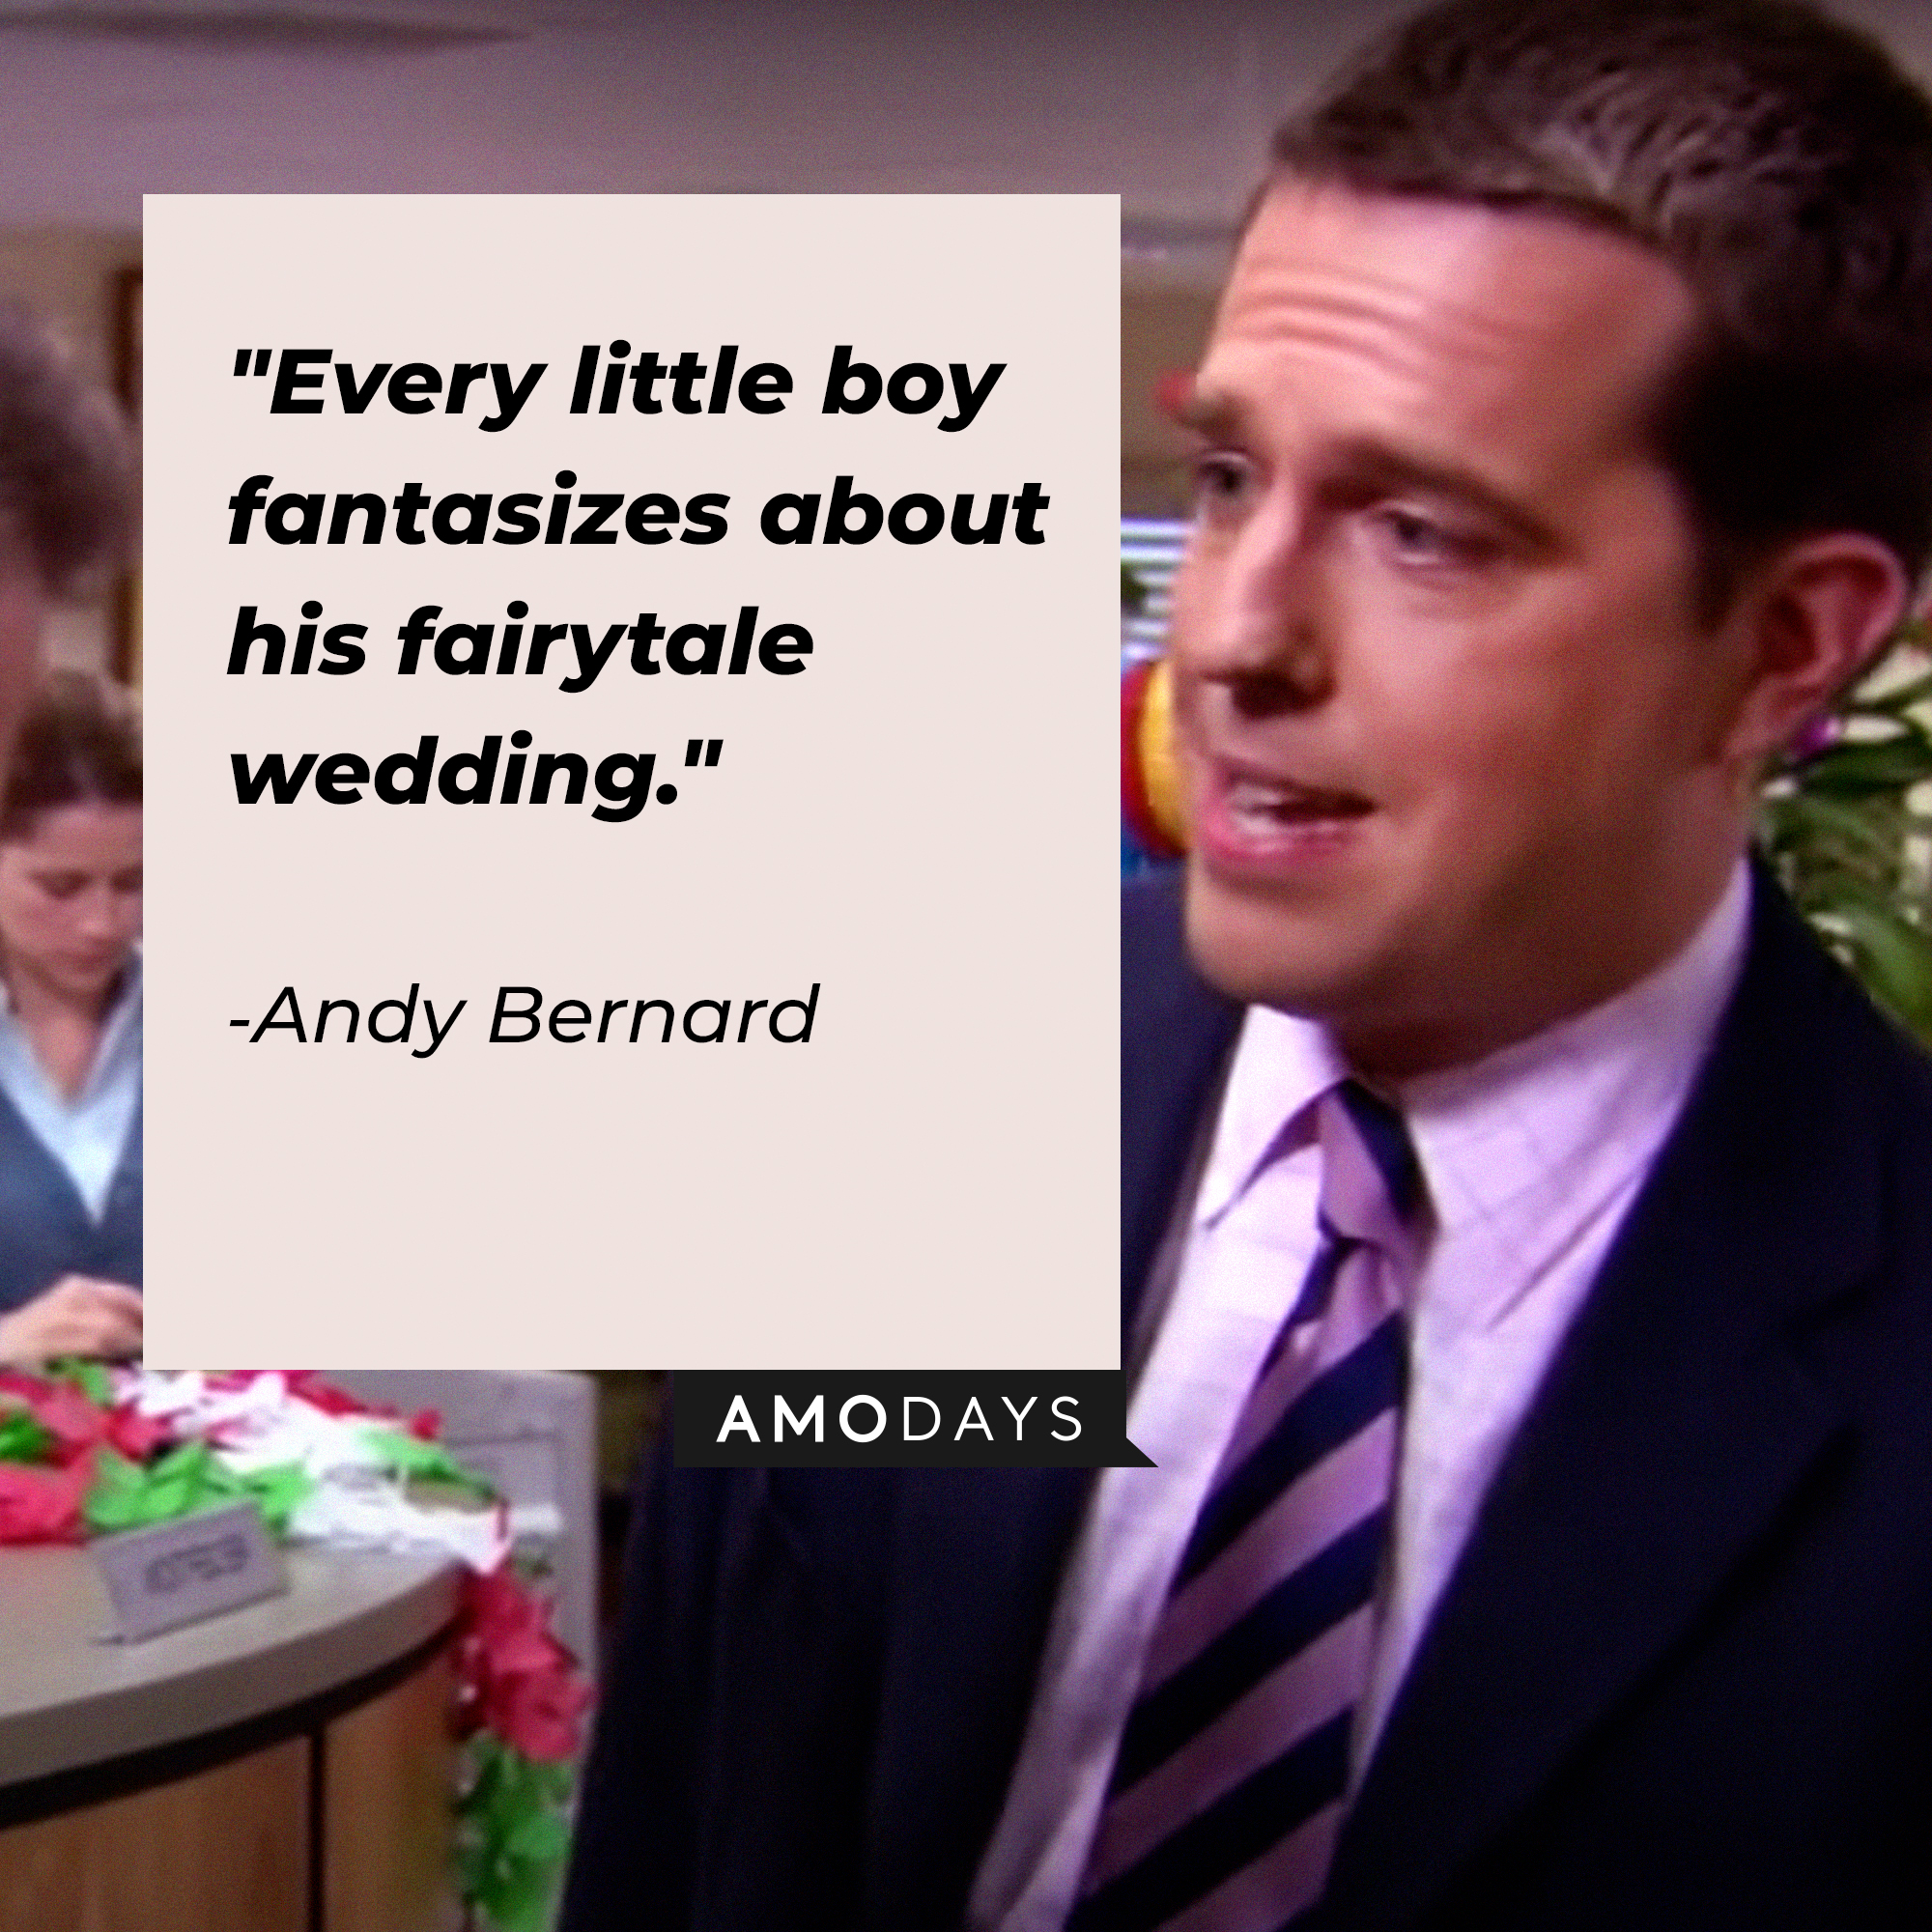 Andy Bernard, with his quote: "Every little boy fantasizes about his fairytale wedding."│Source: youtube.com/TheOffice